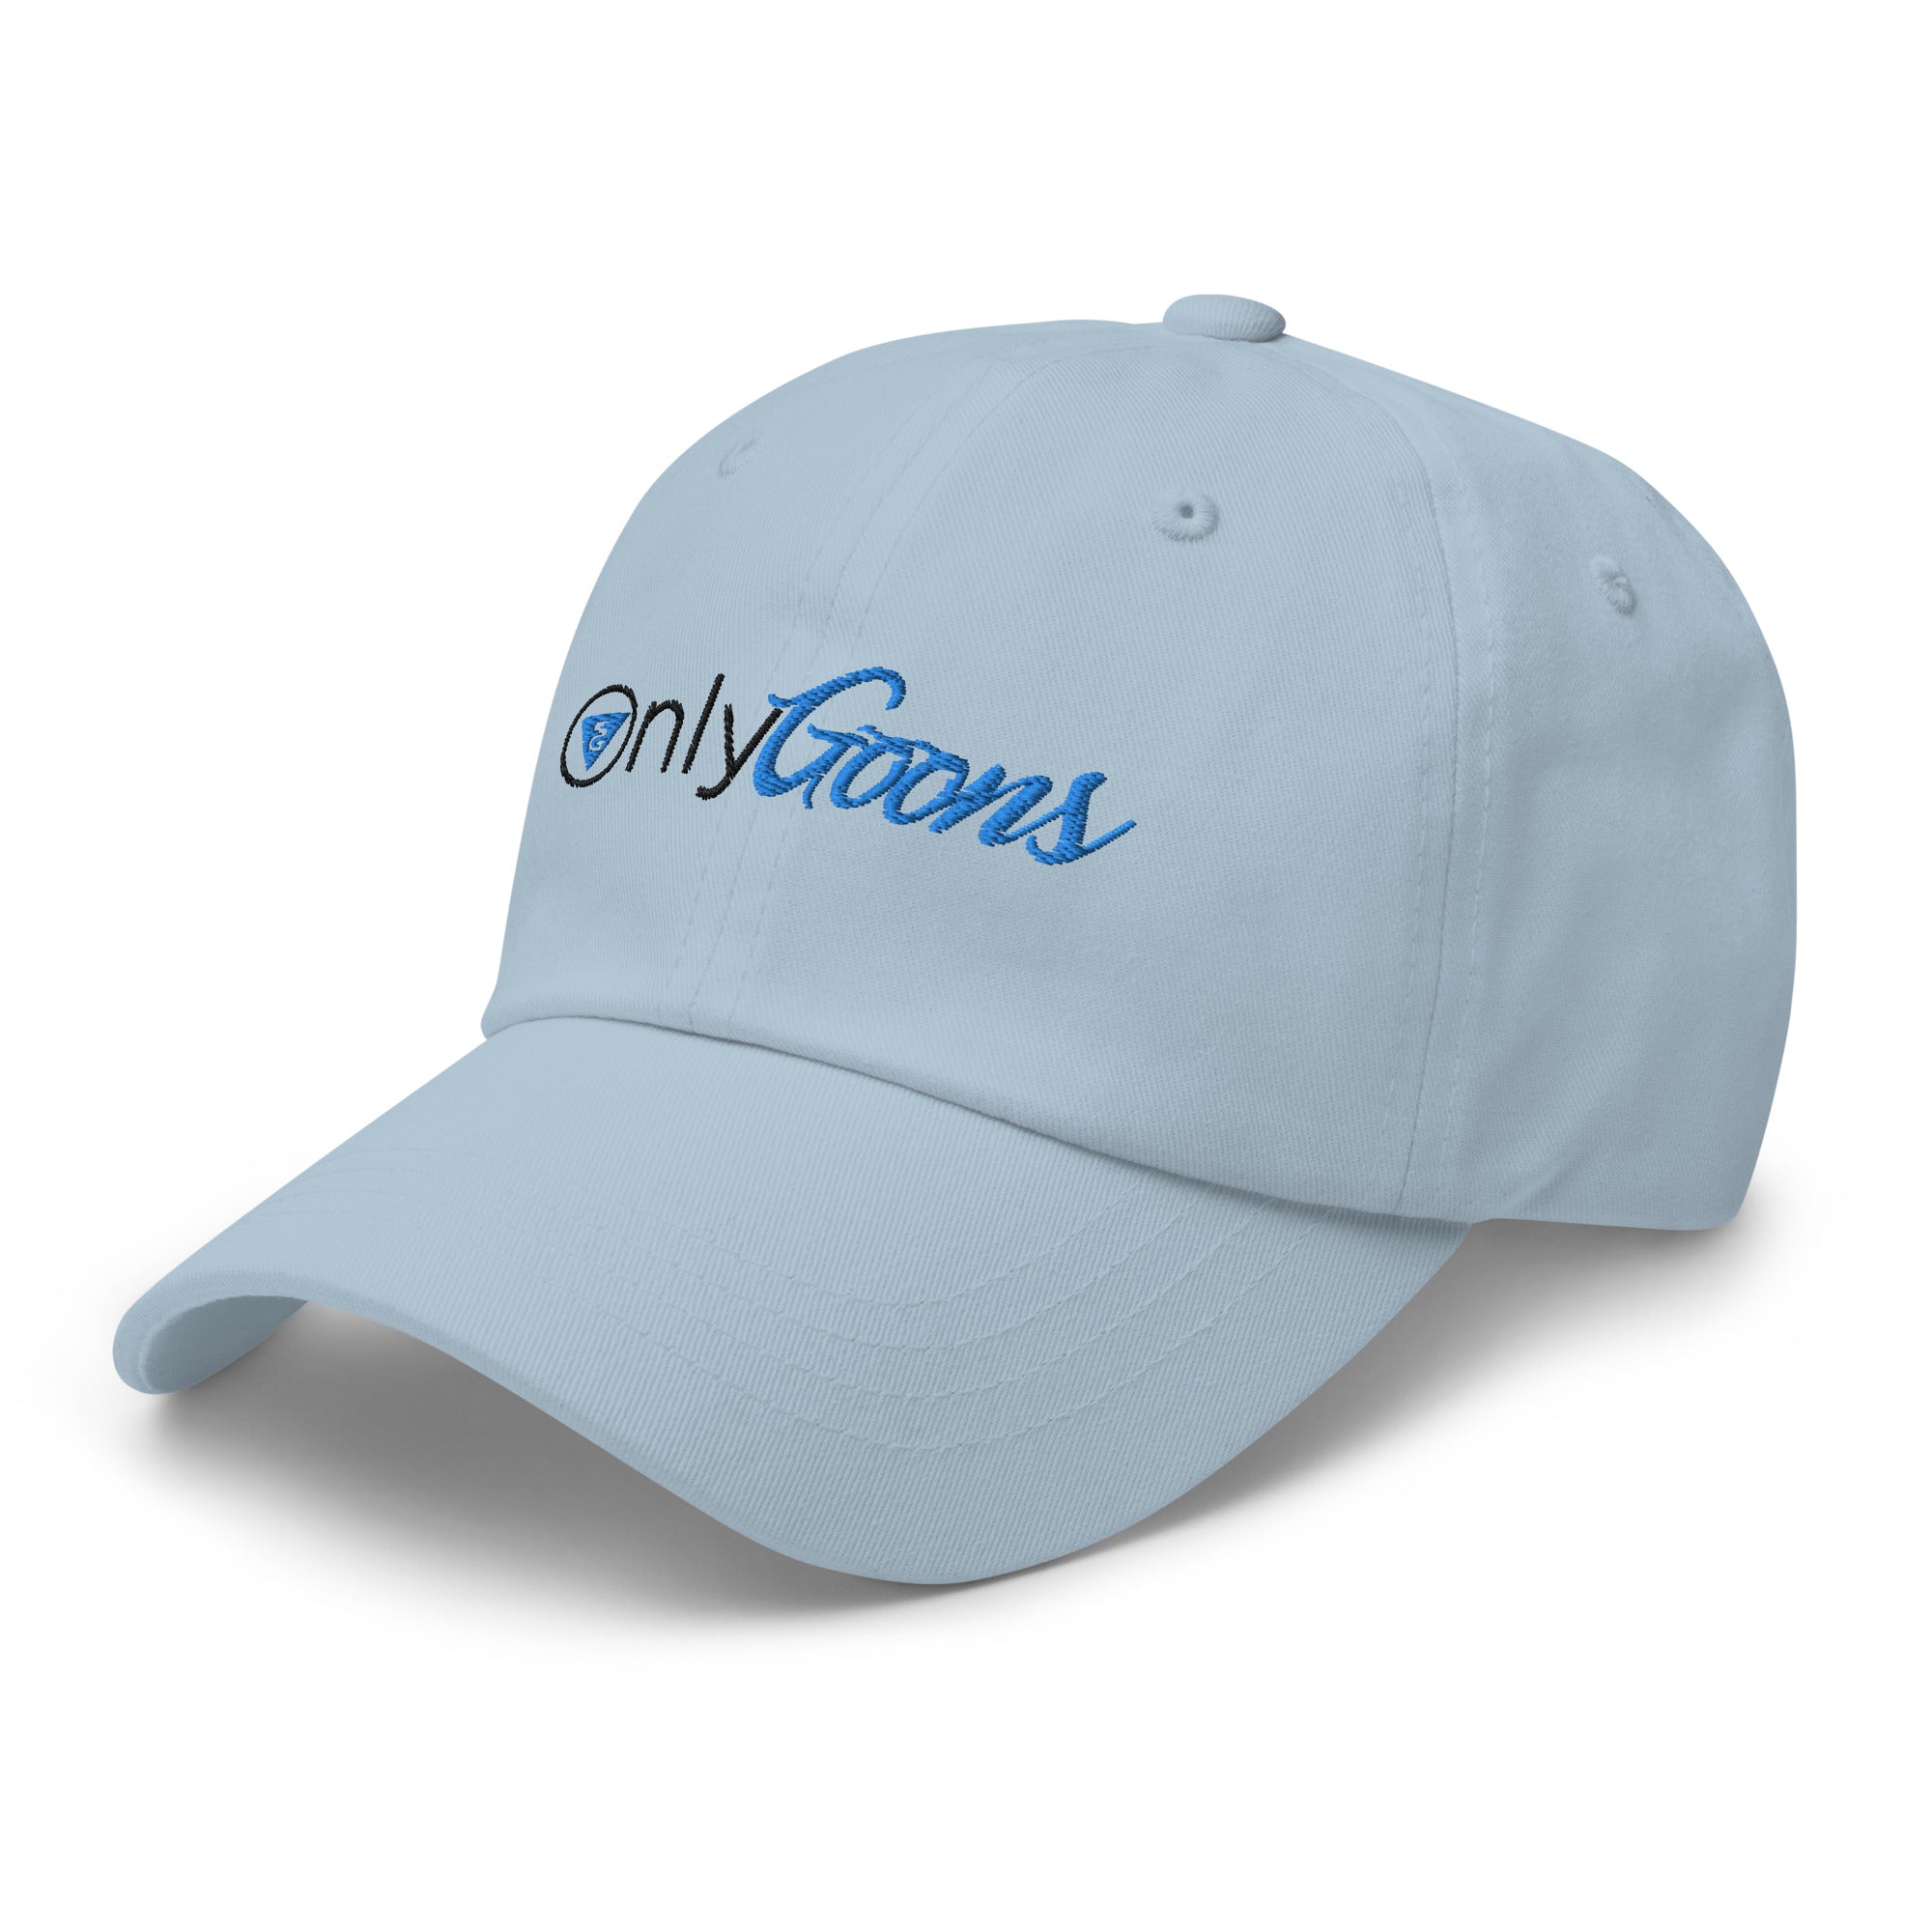 Only Goons Dad hat – Sunset Goons